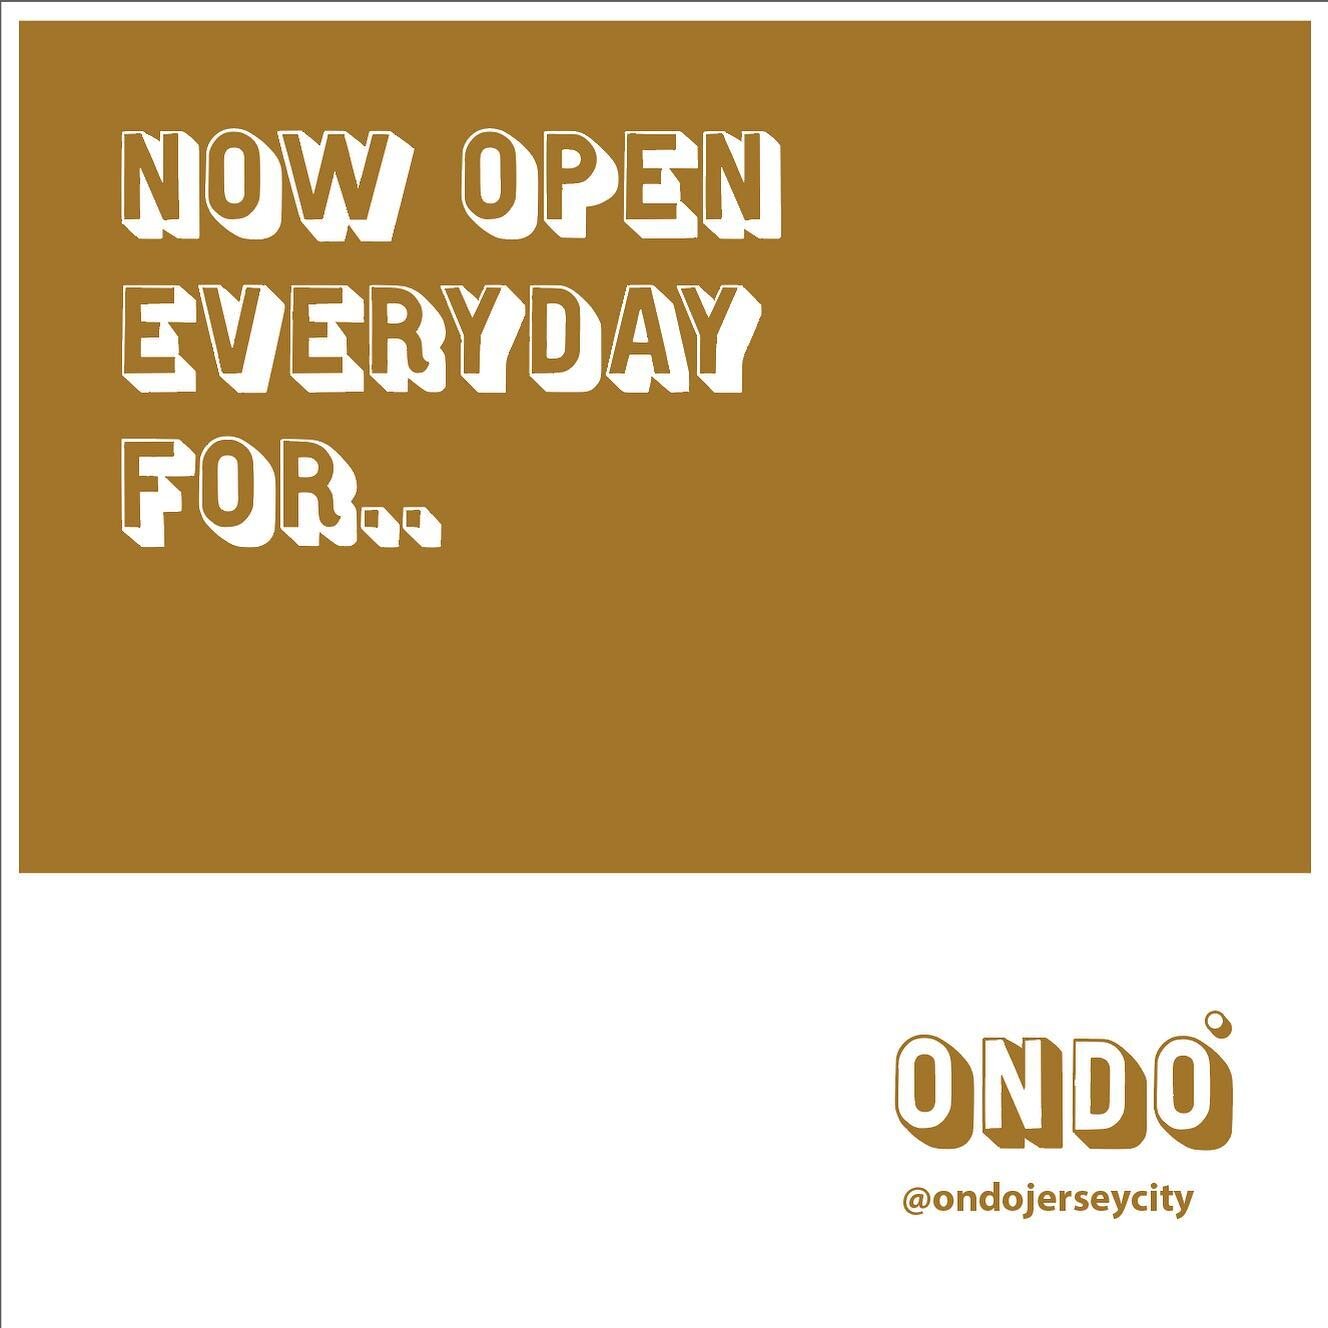 Join us for Lunch or Dinner!
Starting Monday, September 19, ONDO will be open everyday for Lunch and Dinner. 

We&rsquo;re also working on offering delivery/takeout service soon. Follow us for updates!